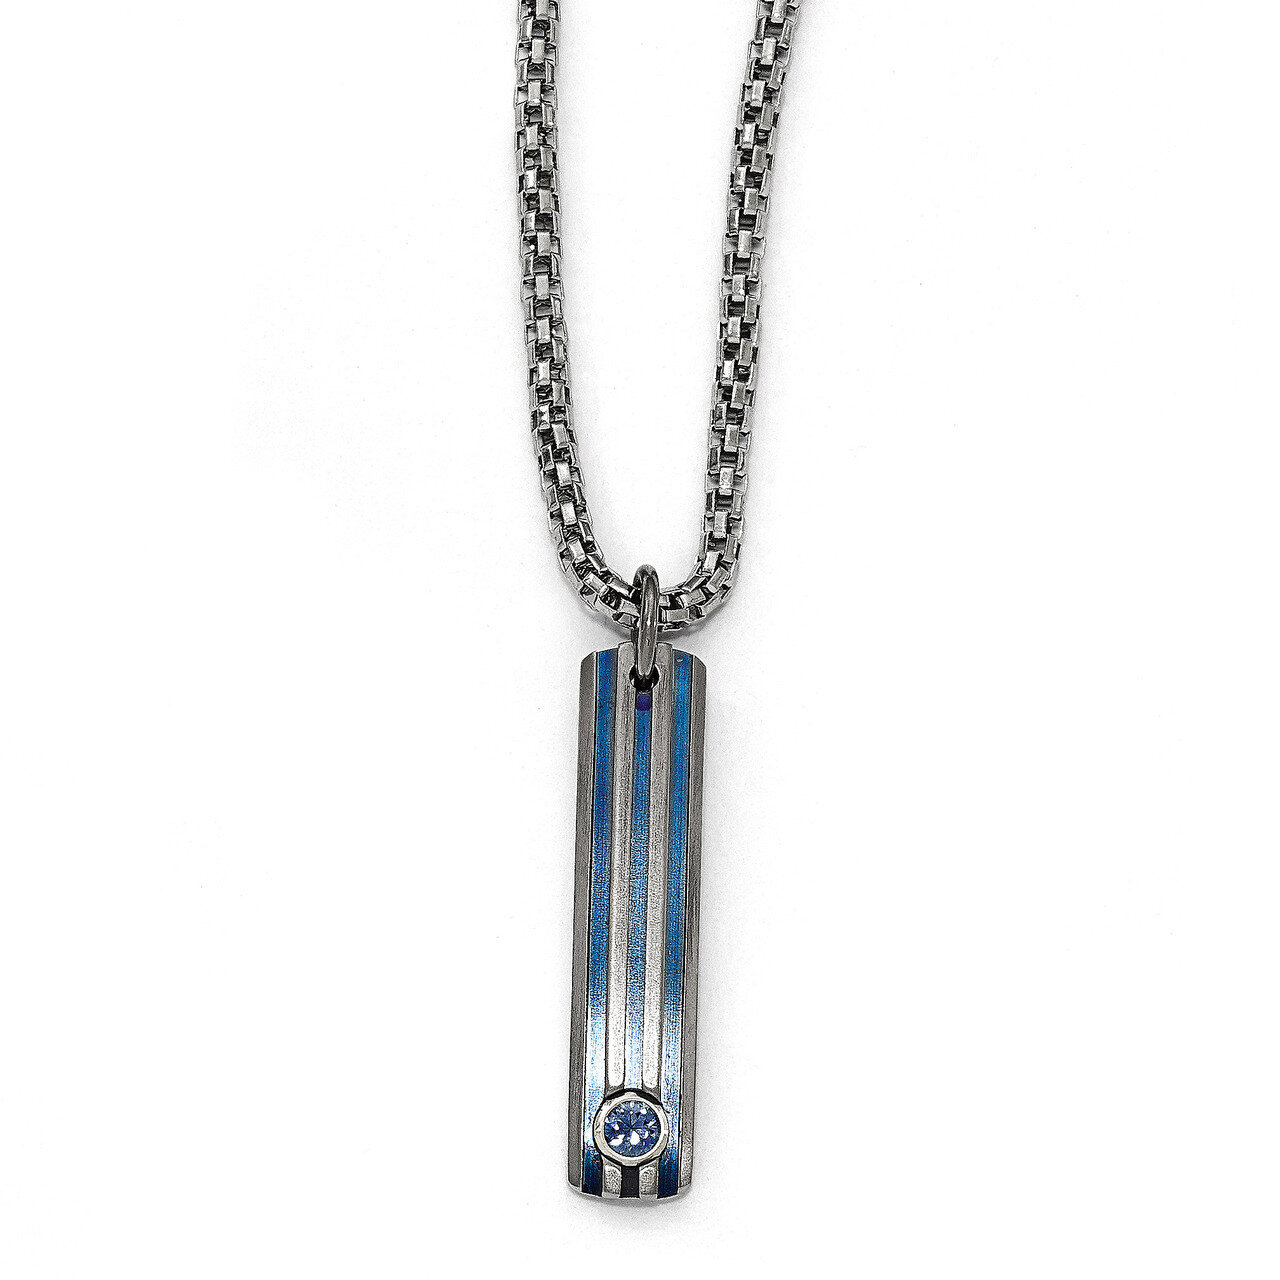 Edward Mirell Titanium Grooved Anodized & Blue Sapphire 2 Inch Extension Necklace EMN152-16